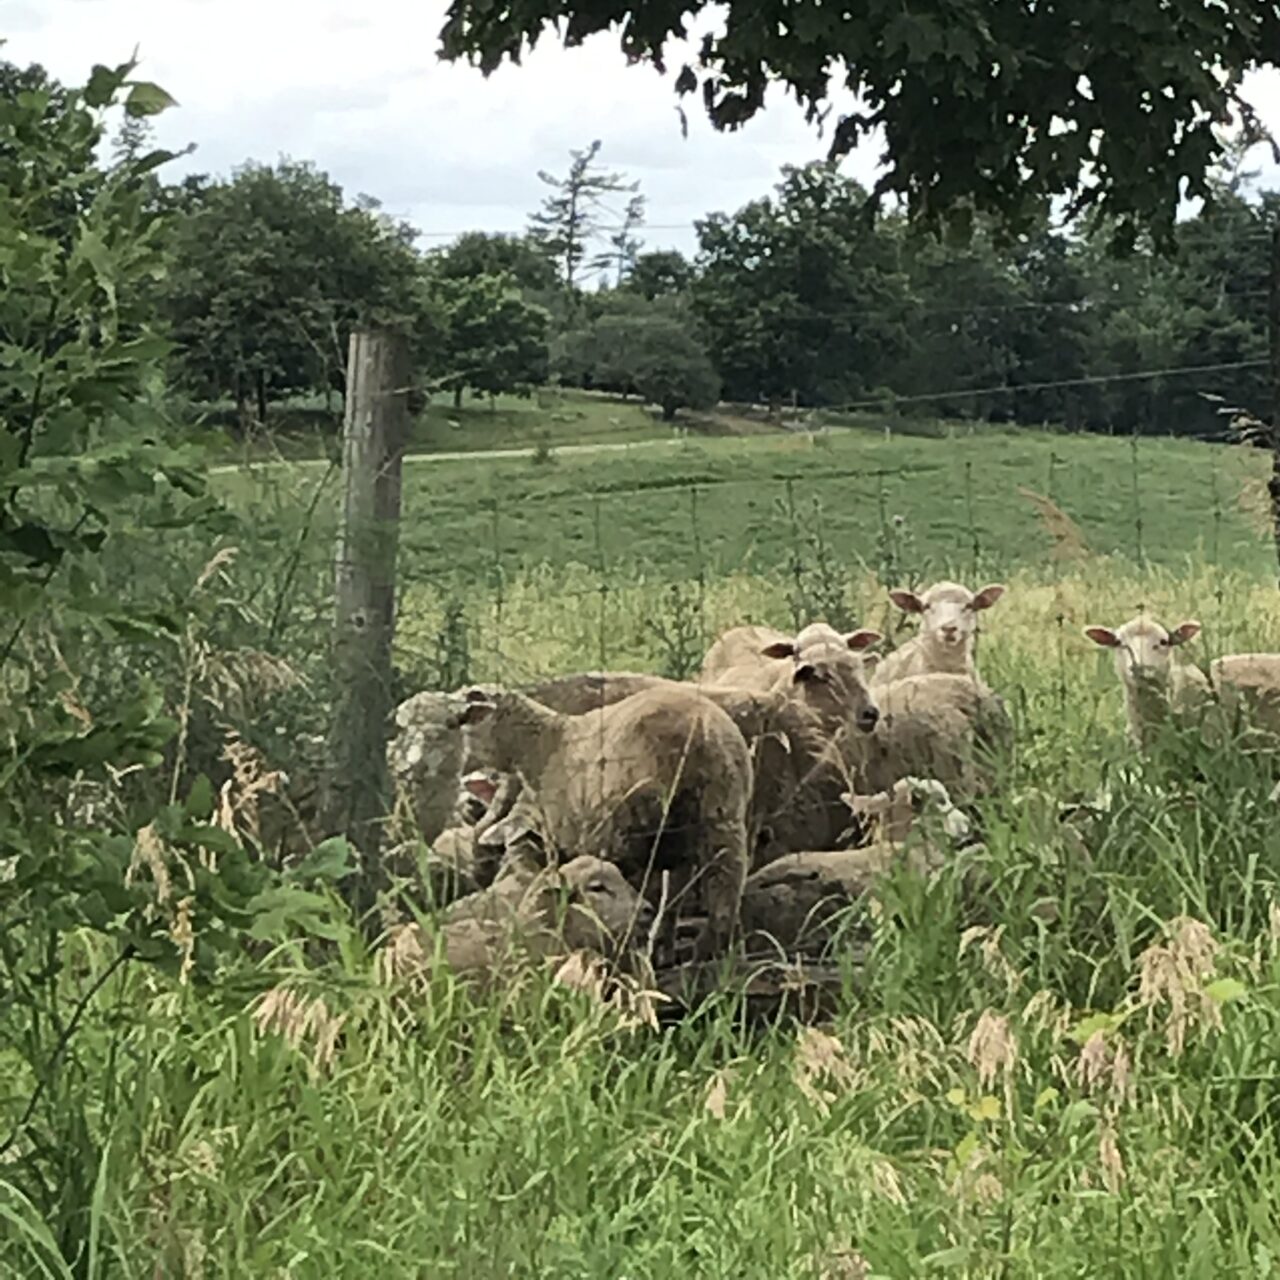 sheep resting in a pasture